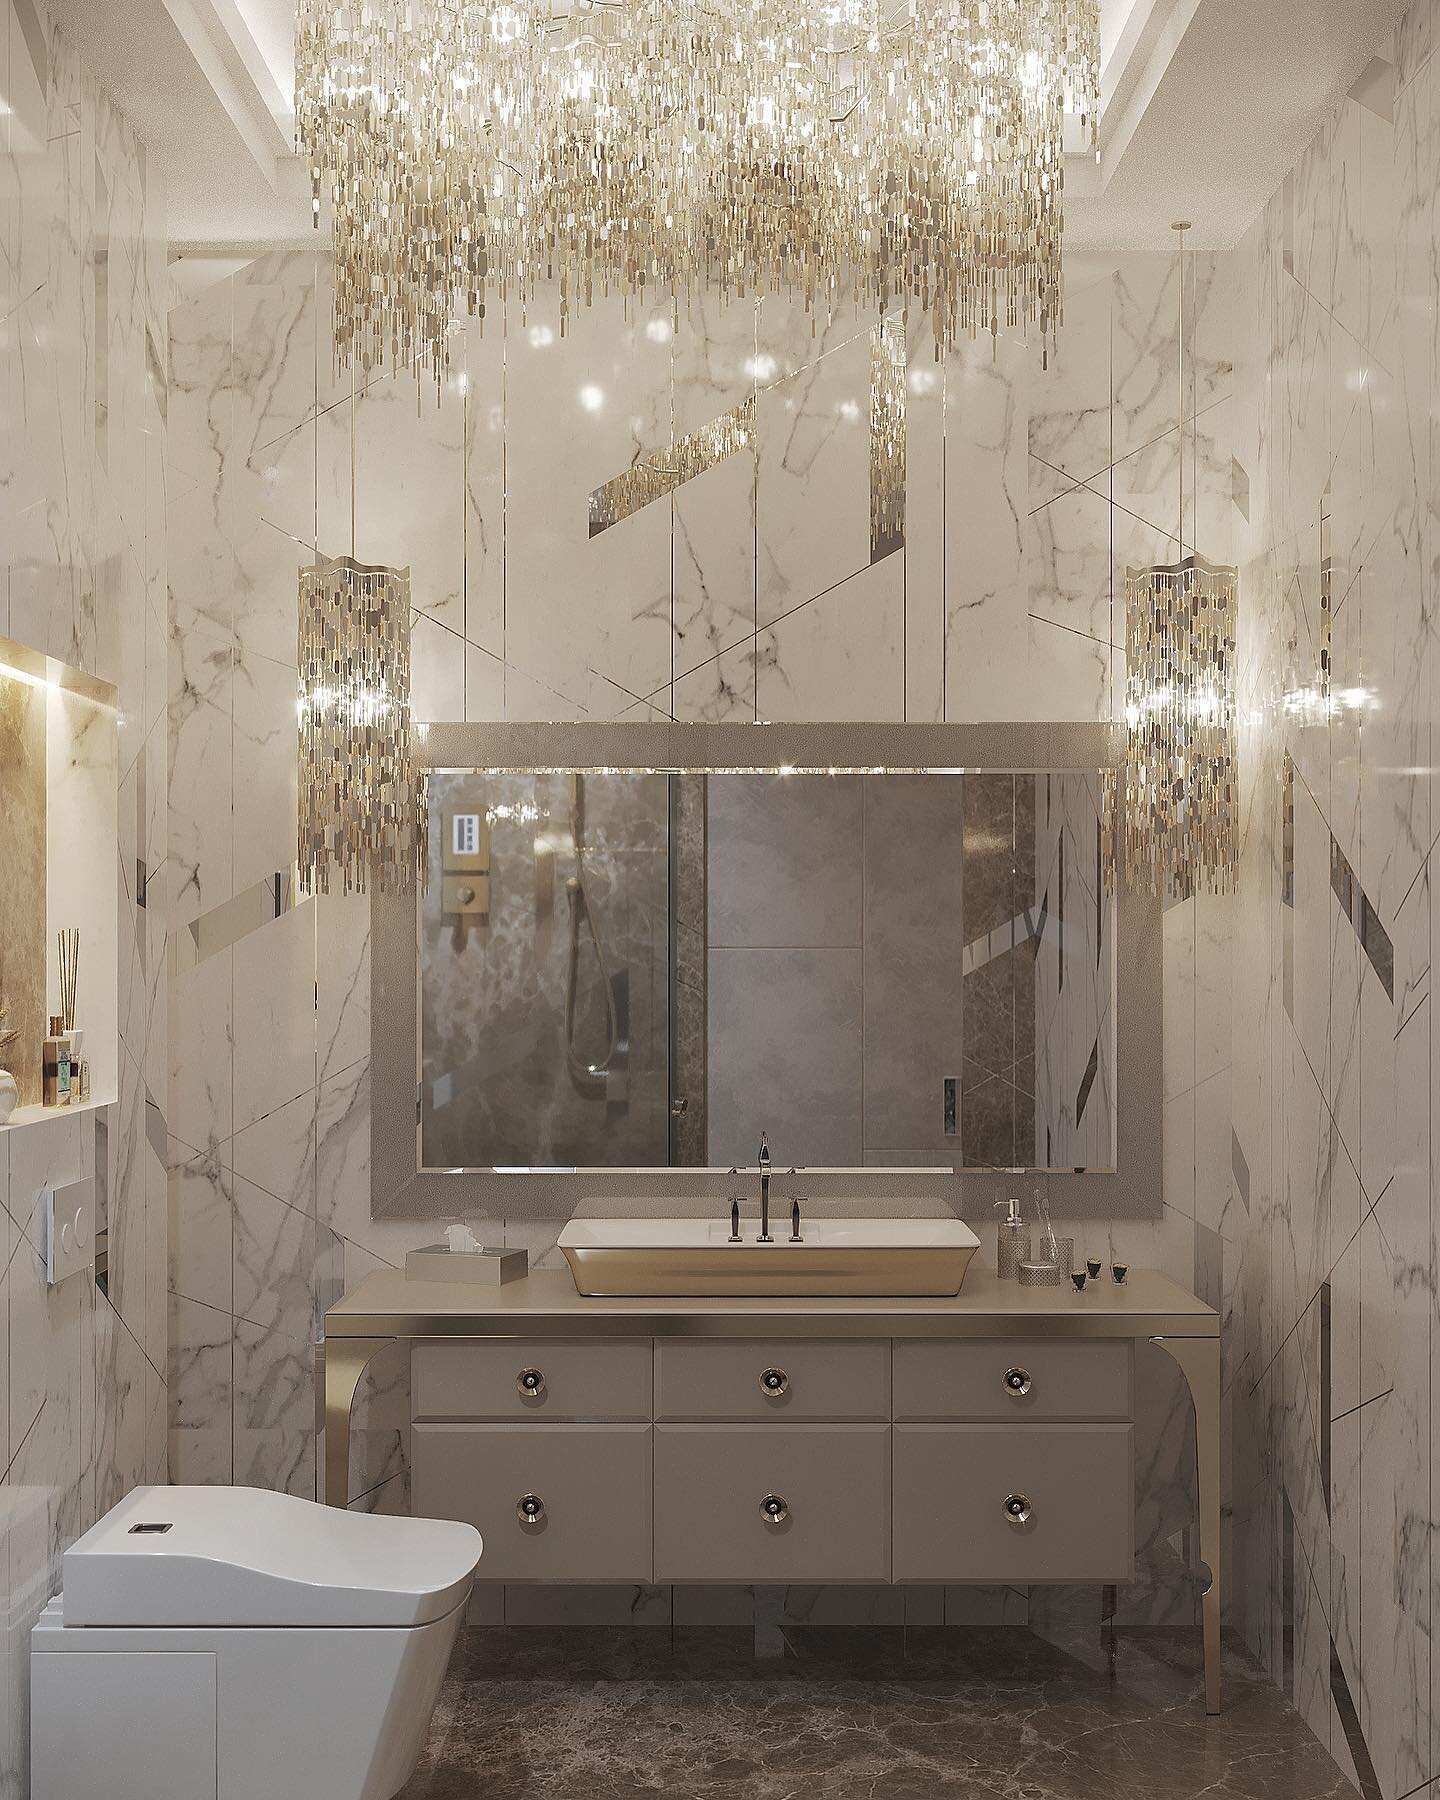 Design by @life_arch 
Светлый санузел! Одна из наших новинок!
~
Bright bathroom!  one of our new project!